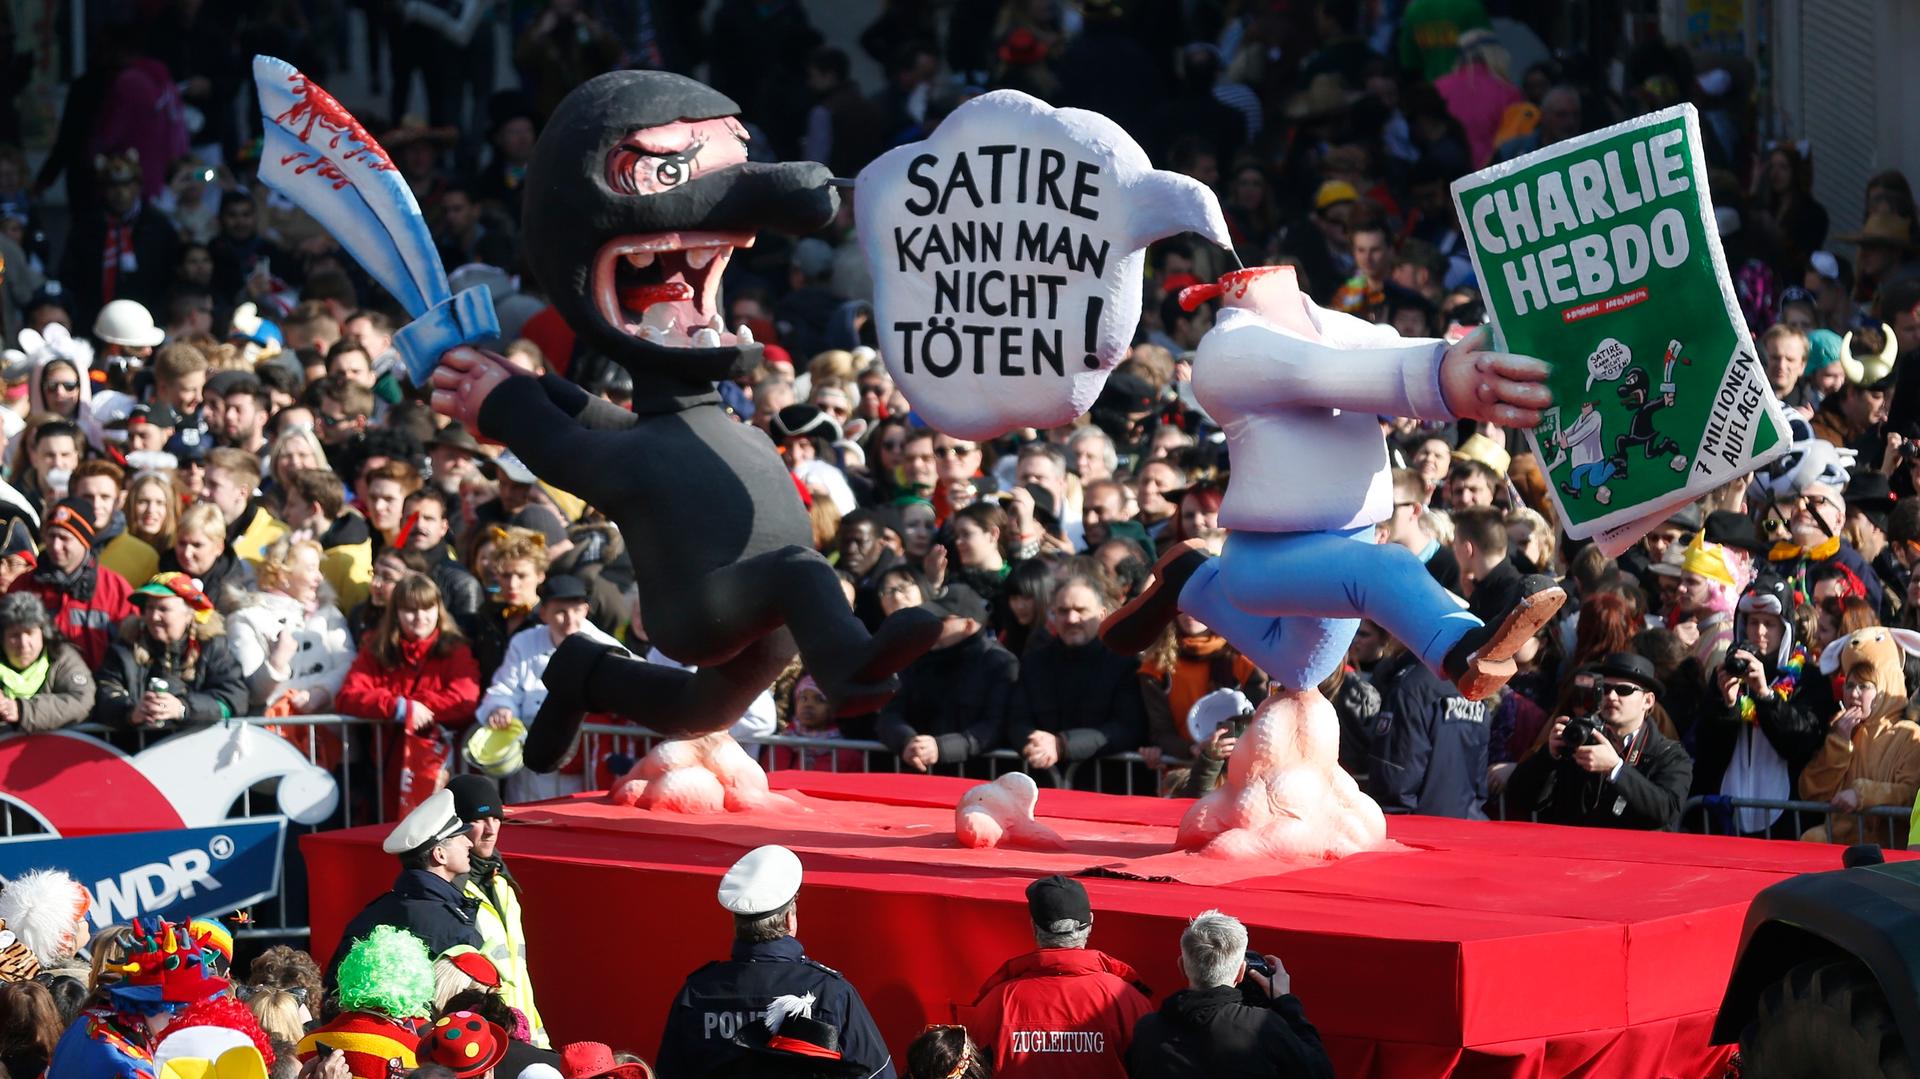 A carnival float by artist Jacques Tilly with a papier-mache caricature drives past revelers during the traditional 'Rose Monday' parade on Carnival in the western German city of Duesseldorf. "You can't kill satire," the sign reads.